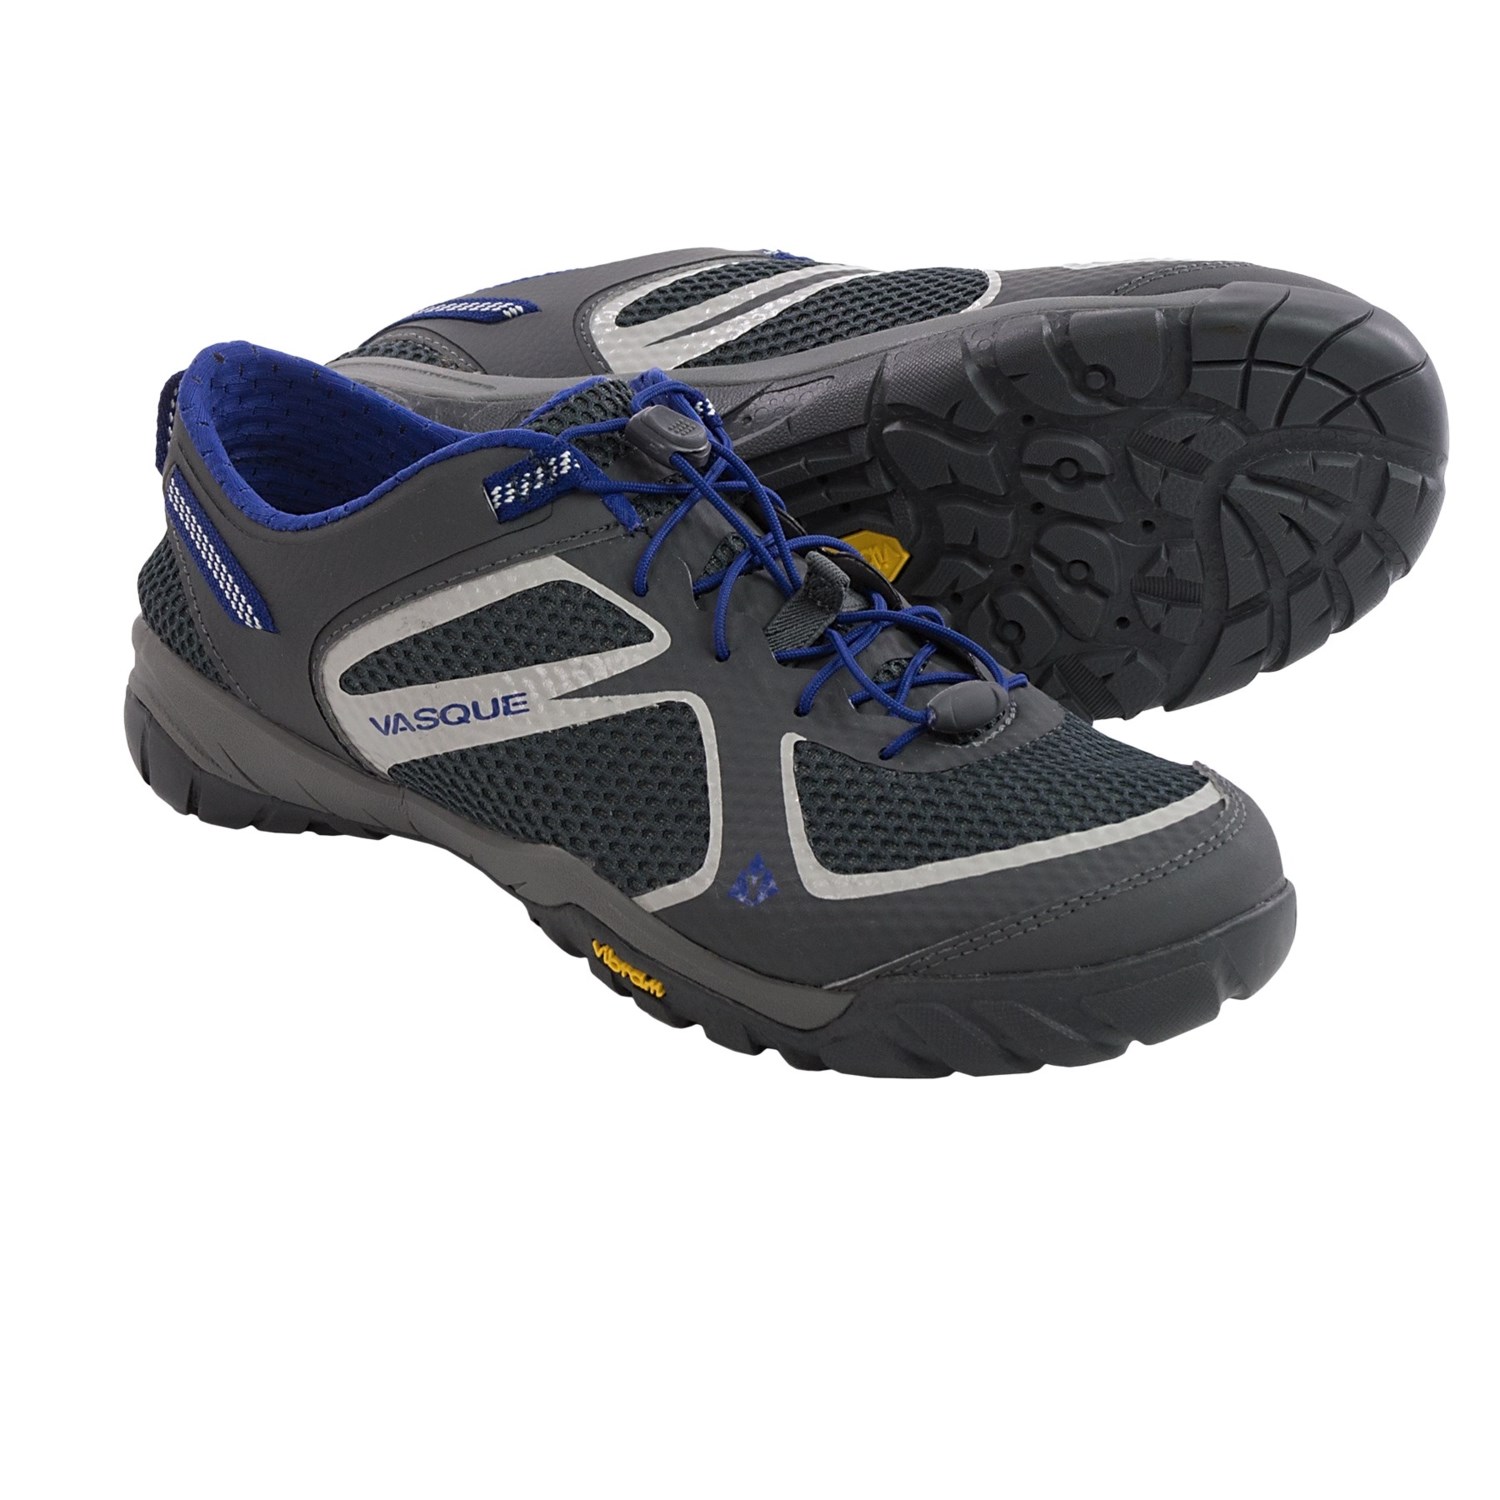 Vasque Lotic Water Shoes (For Men) - Save 40%